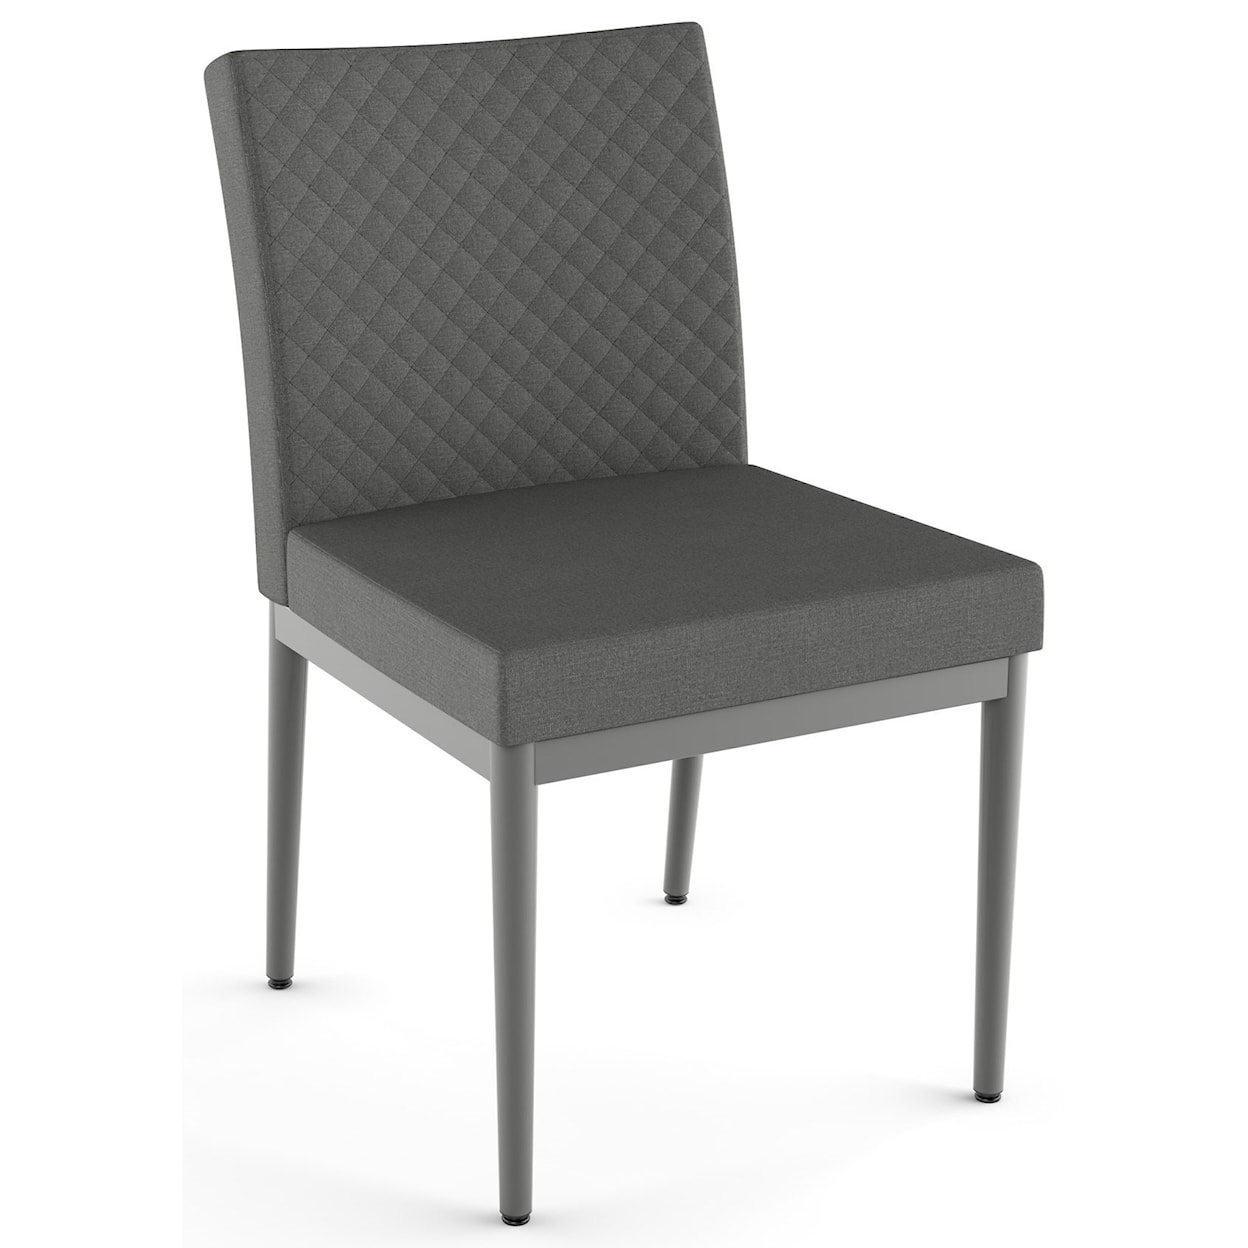 Amisco Urban Monroe Chair with Quilted Fabric